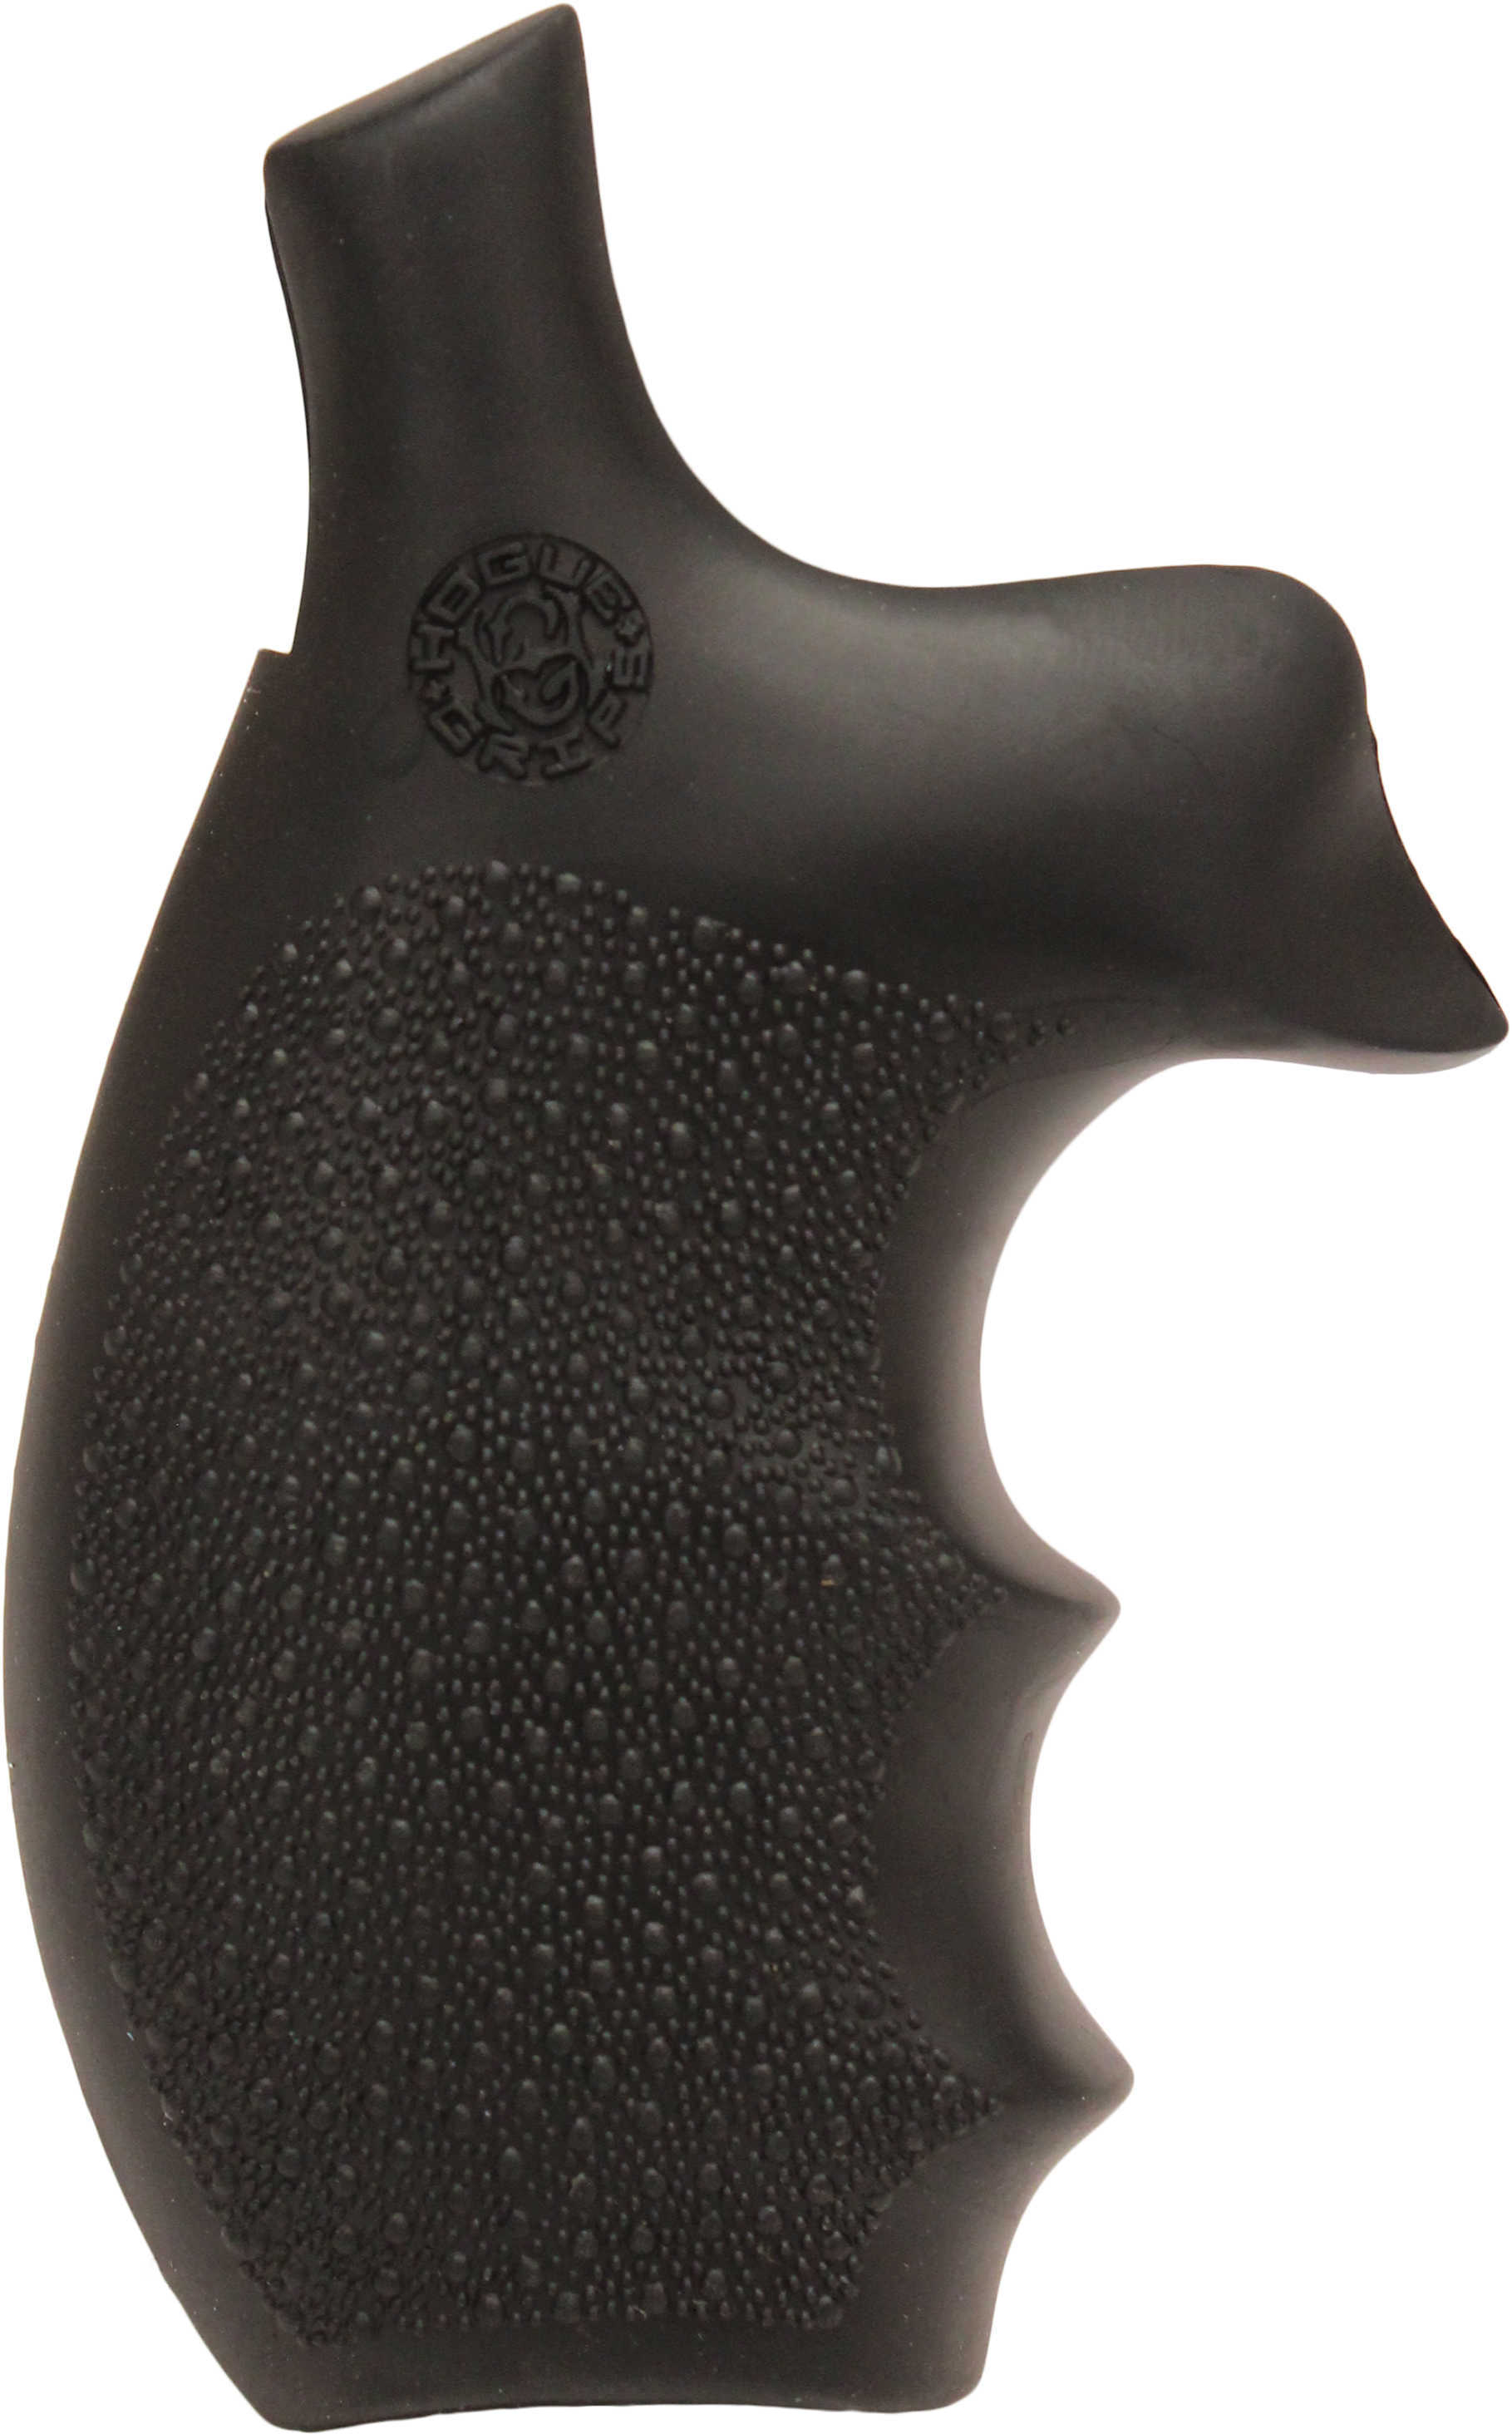 Hogue 62000 Rubber Bantam with Finger Grooves Grip S&W K/L Frame w/Round Butt Black